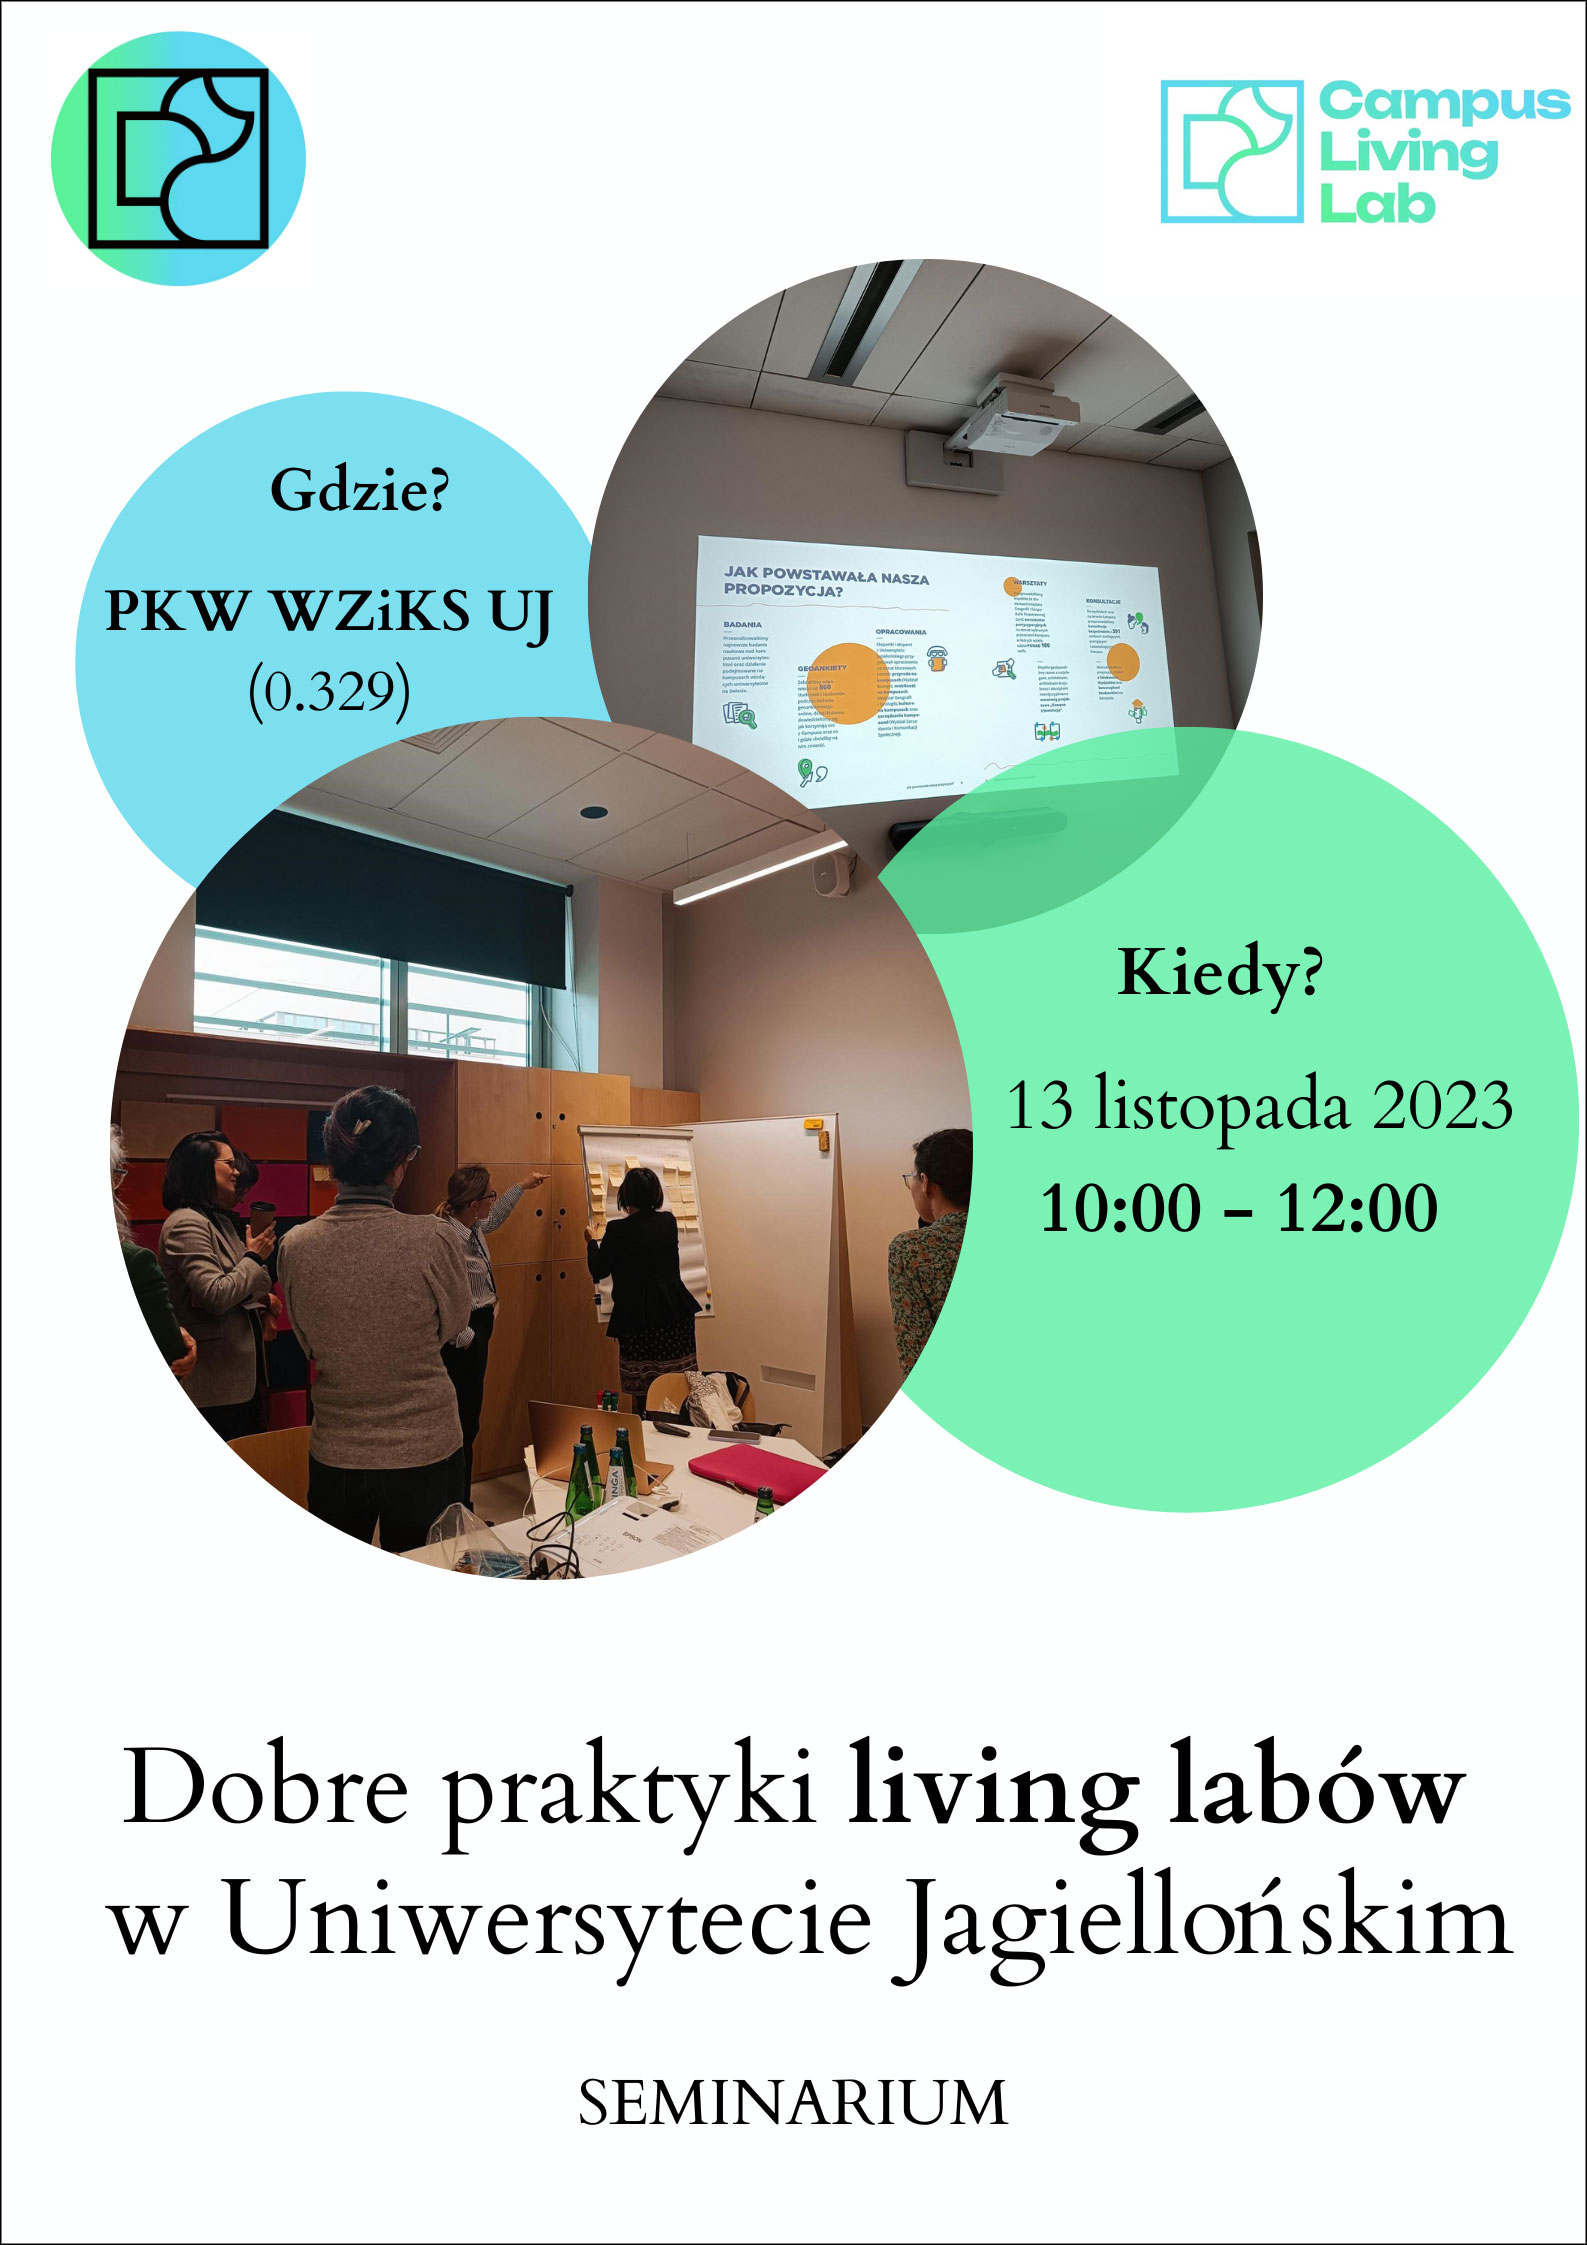 Best practices of living labs at the Jagiellonian University [seminar]